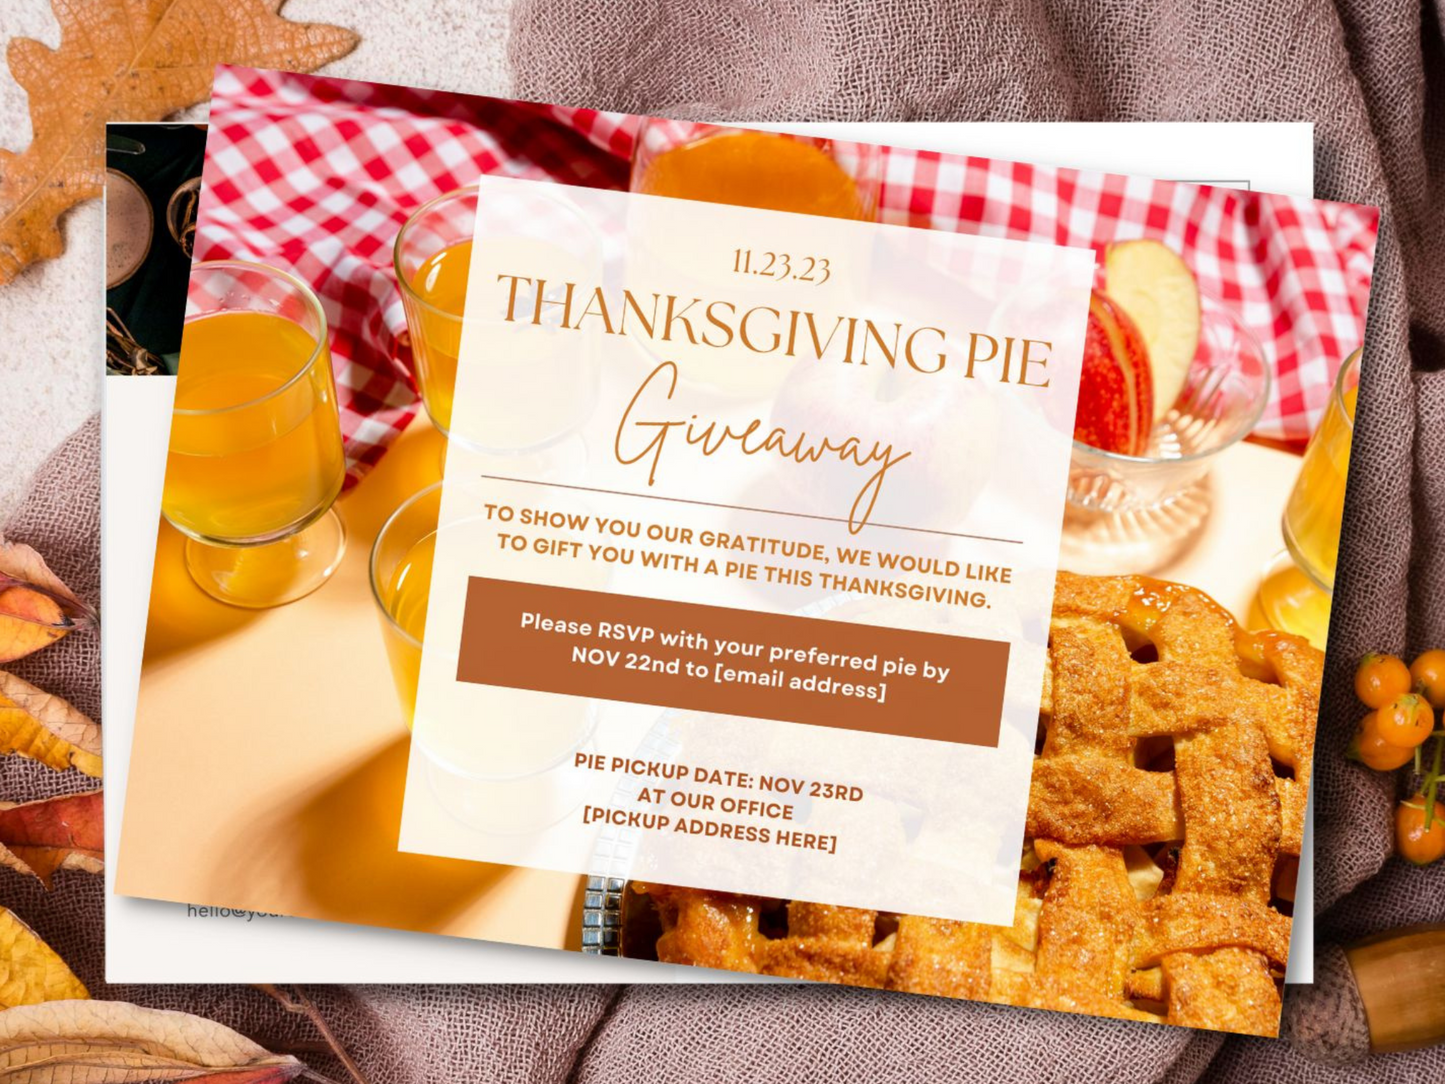 Real Estate Thanksgiving Pie Giveaway Postcard - Heartwarming postcard inviting clients to a delightful Thanksgiving pie giveaway for a memorable and engaging way to express gratitude and foster connections during the festive season.